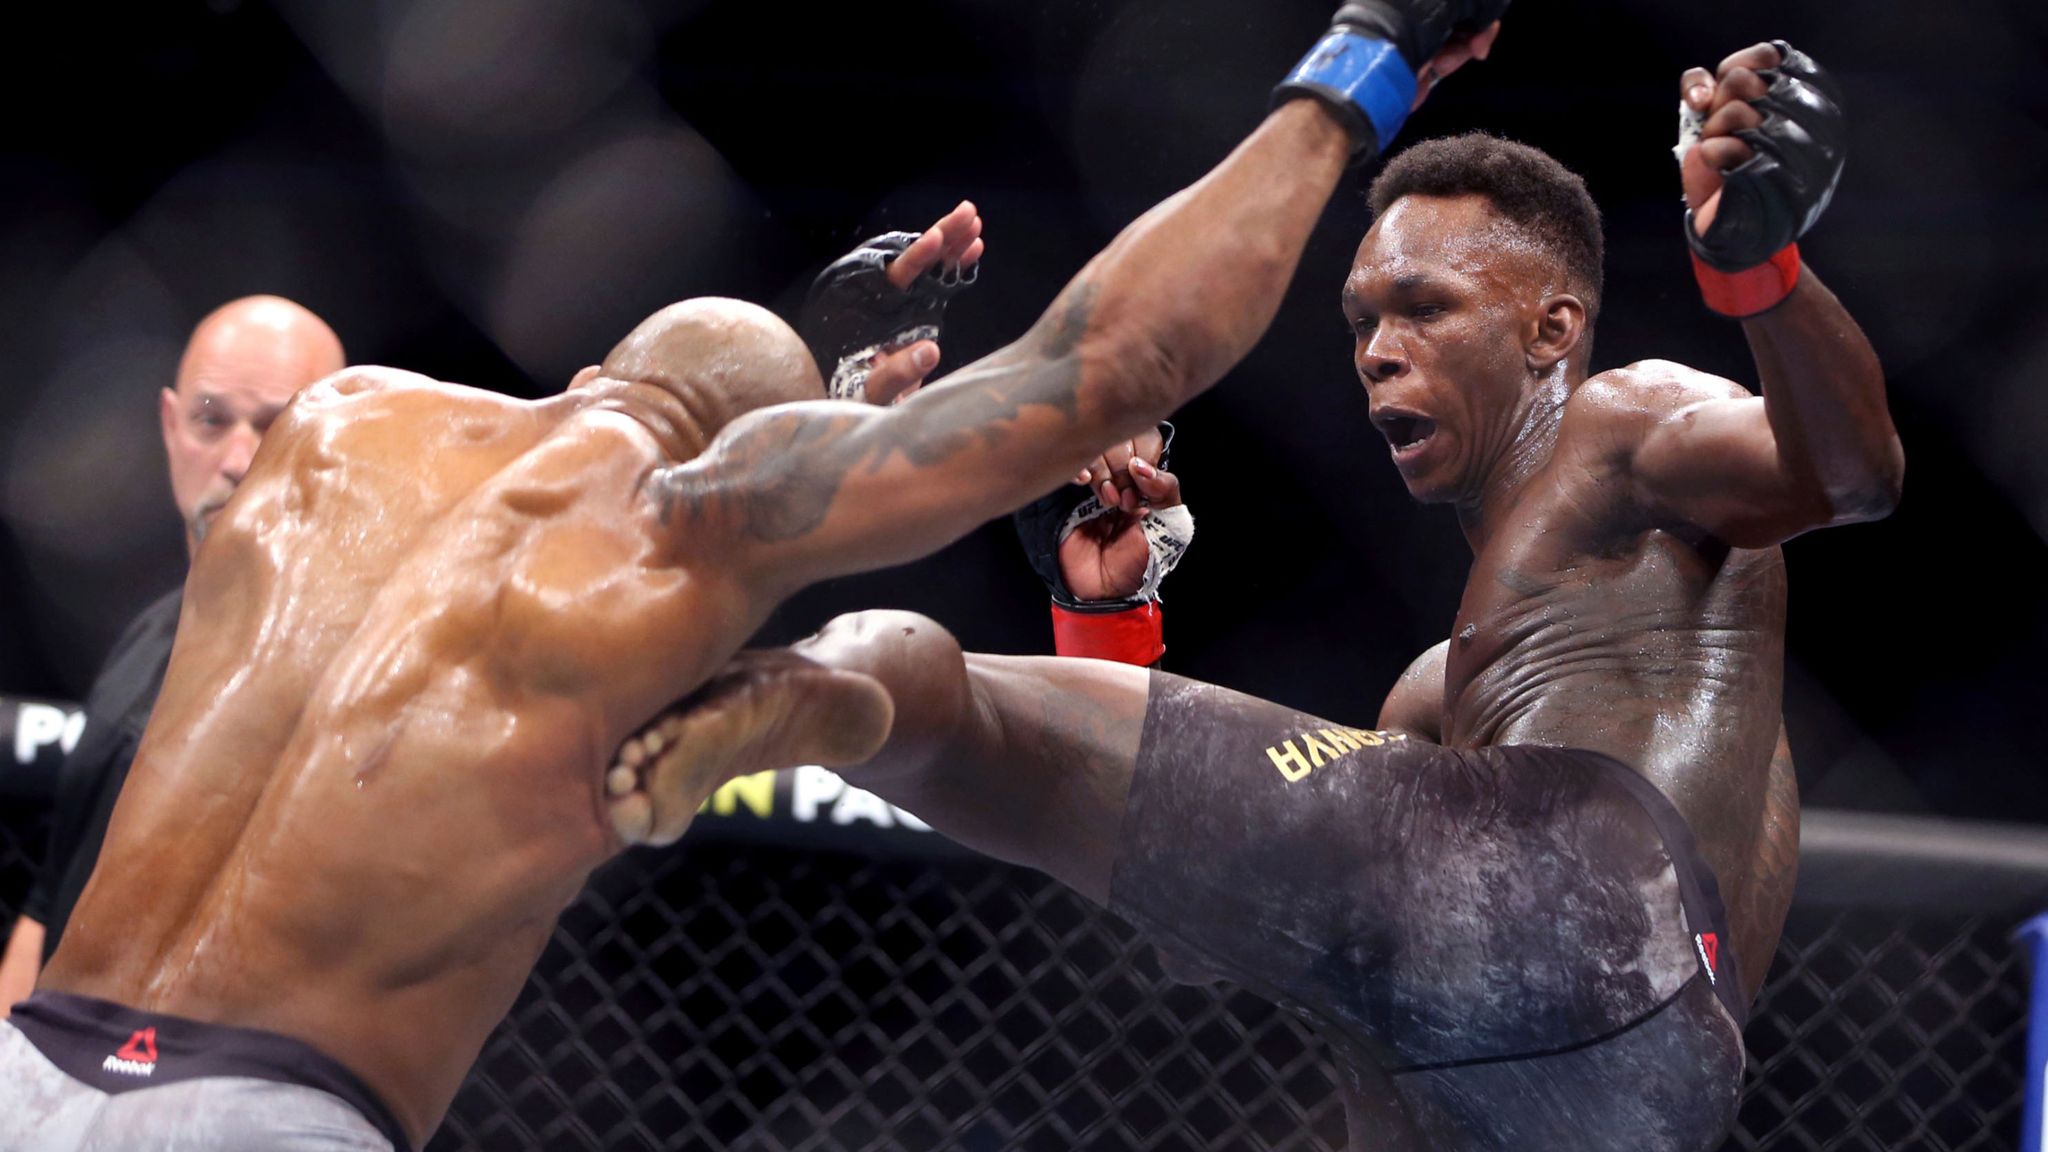 De er Skibform tvetydig Israel Adesanya looking to overcome weight shortcoming to reign as UFC light -heavyweight champion | MMA News | Sky Sports